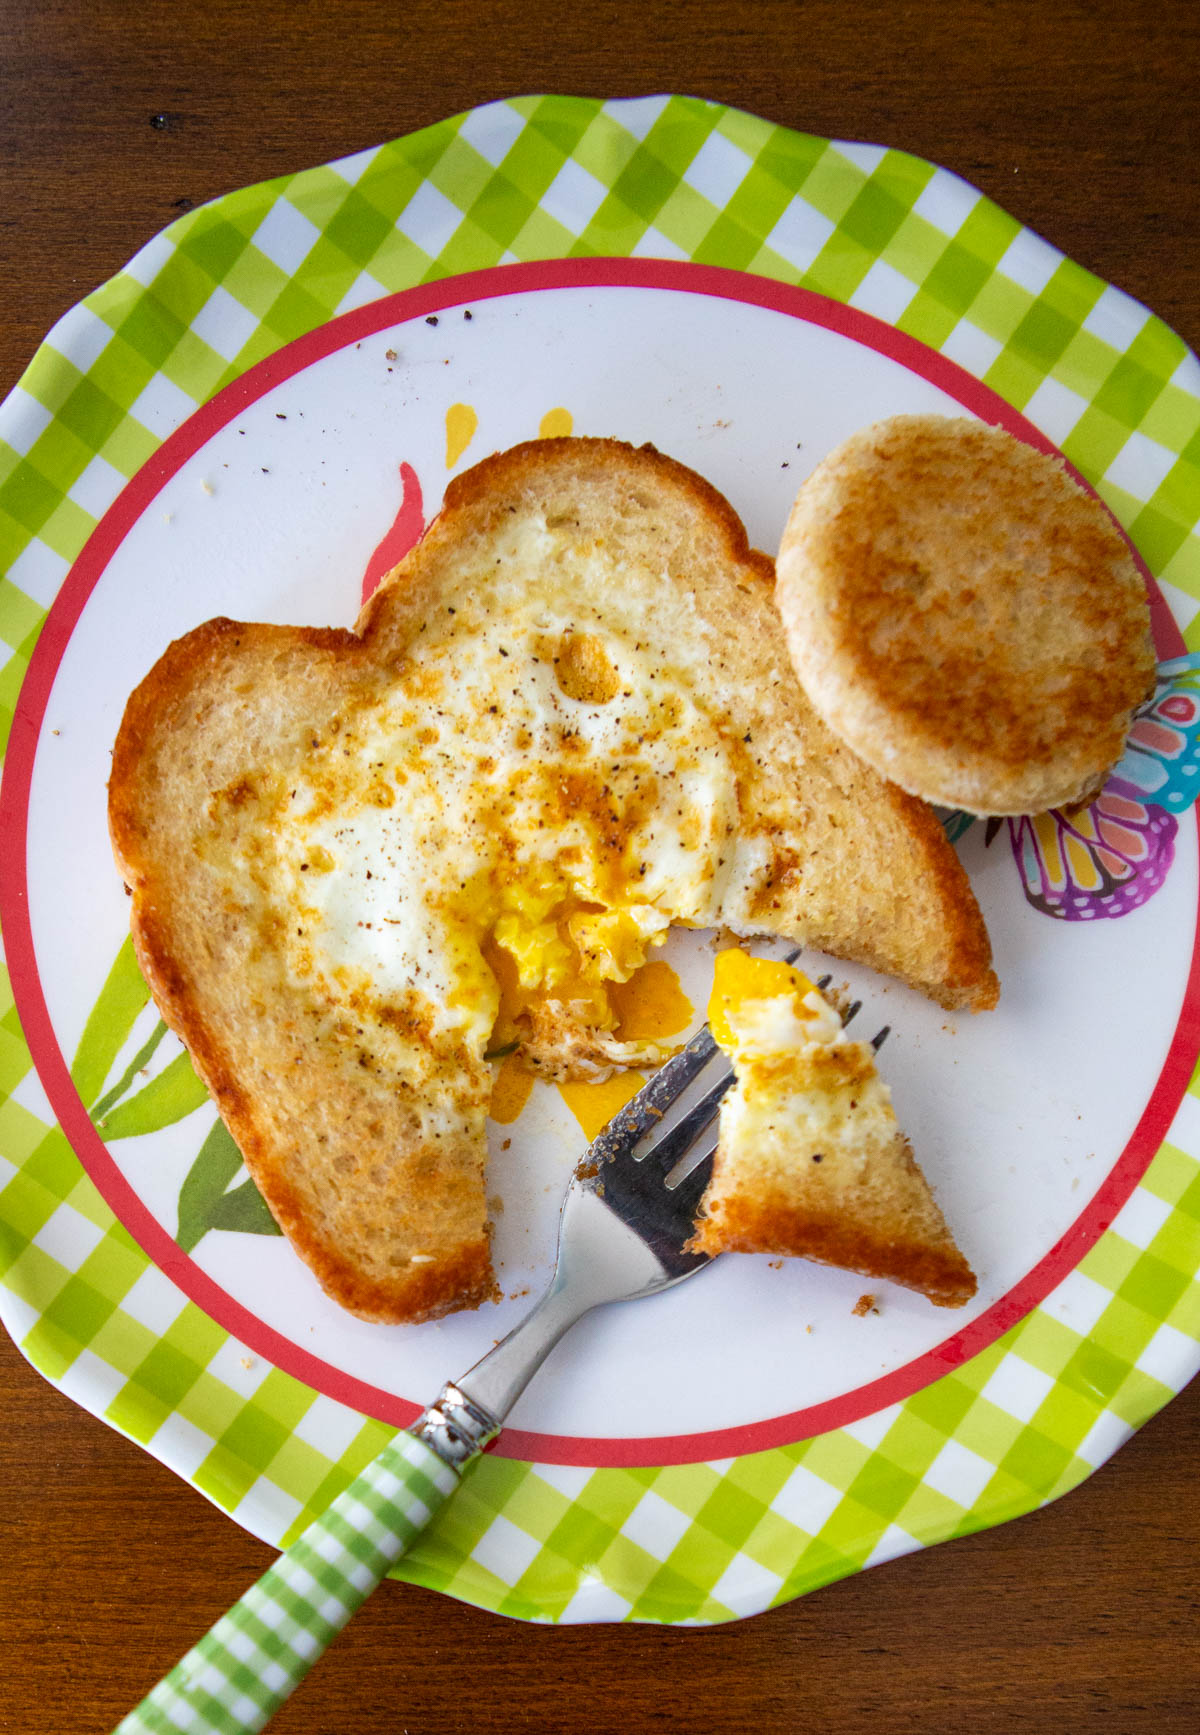 The egg in a basket toast is on a kid plate with a fork.